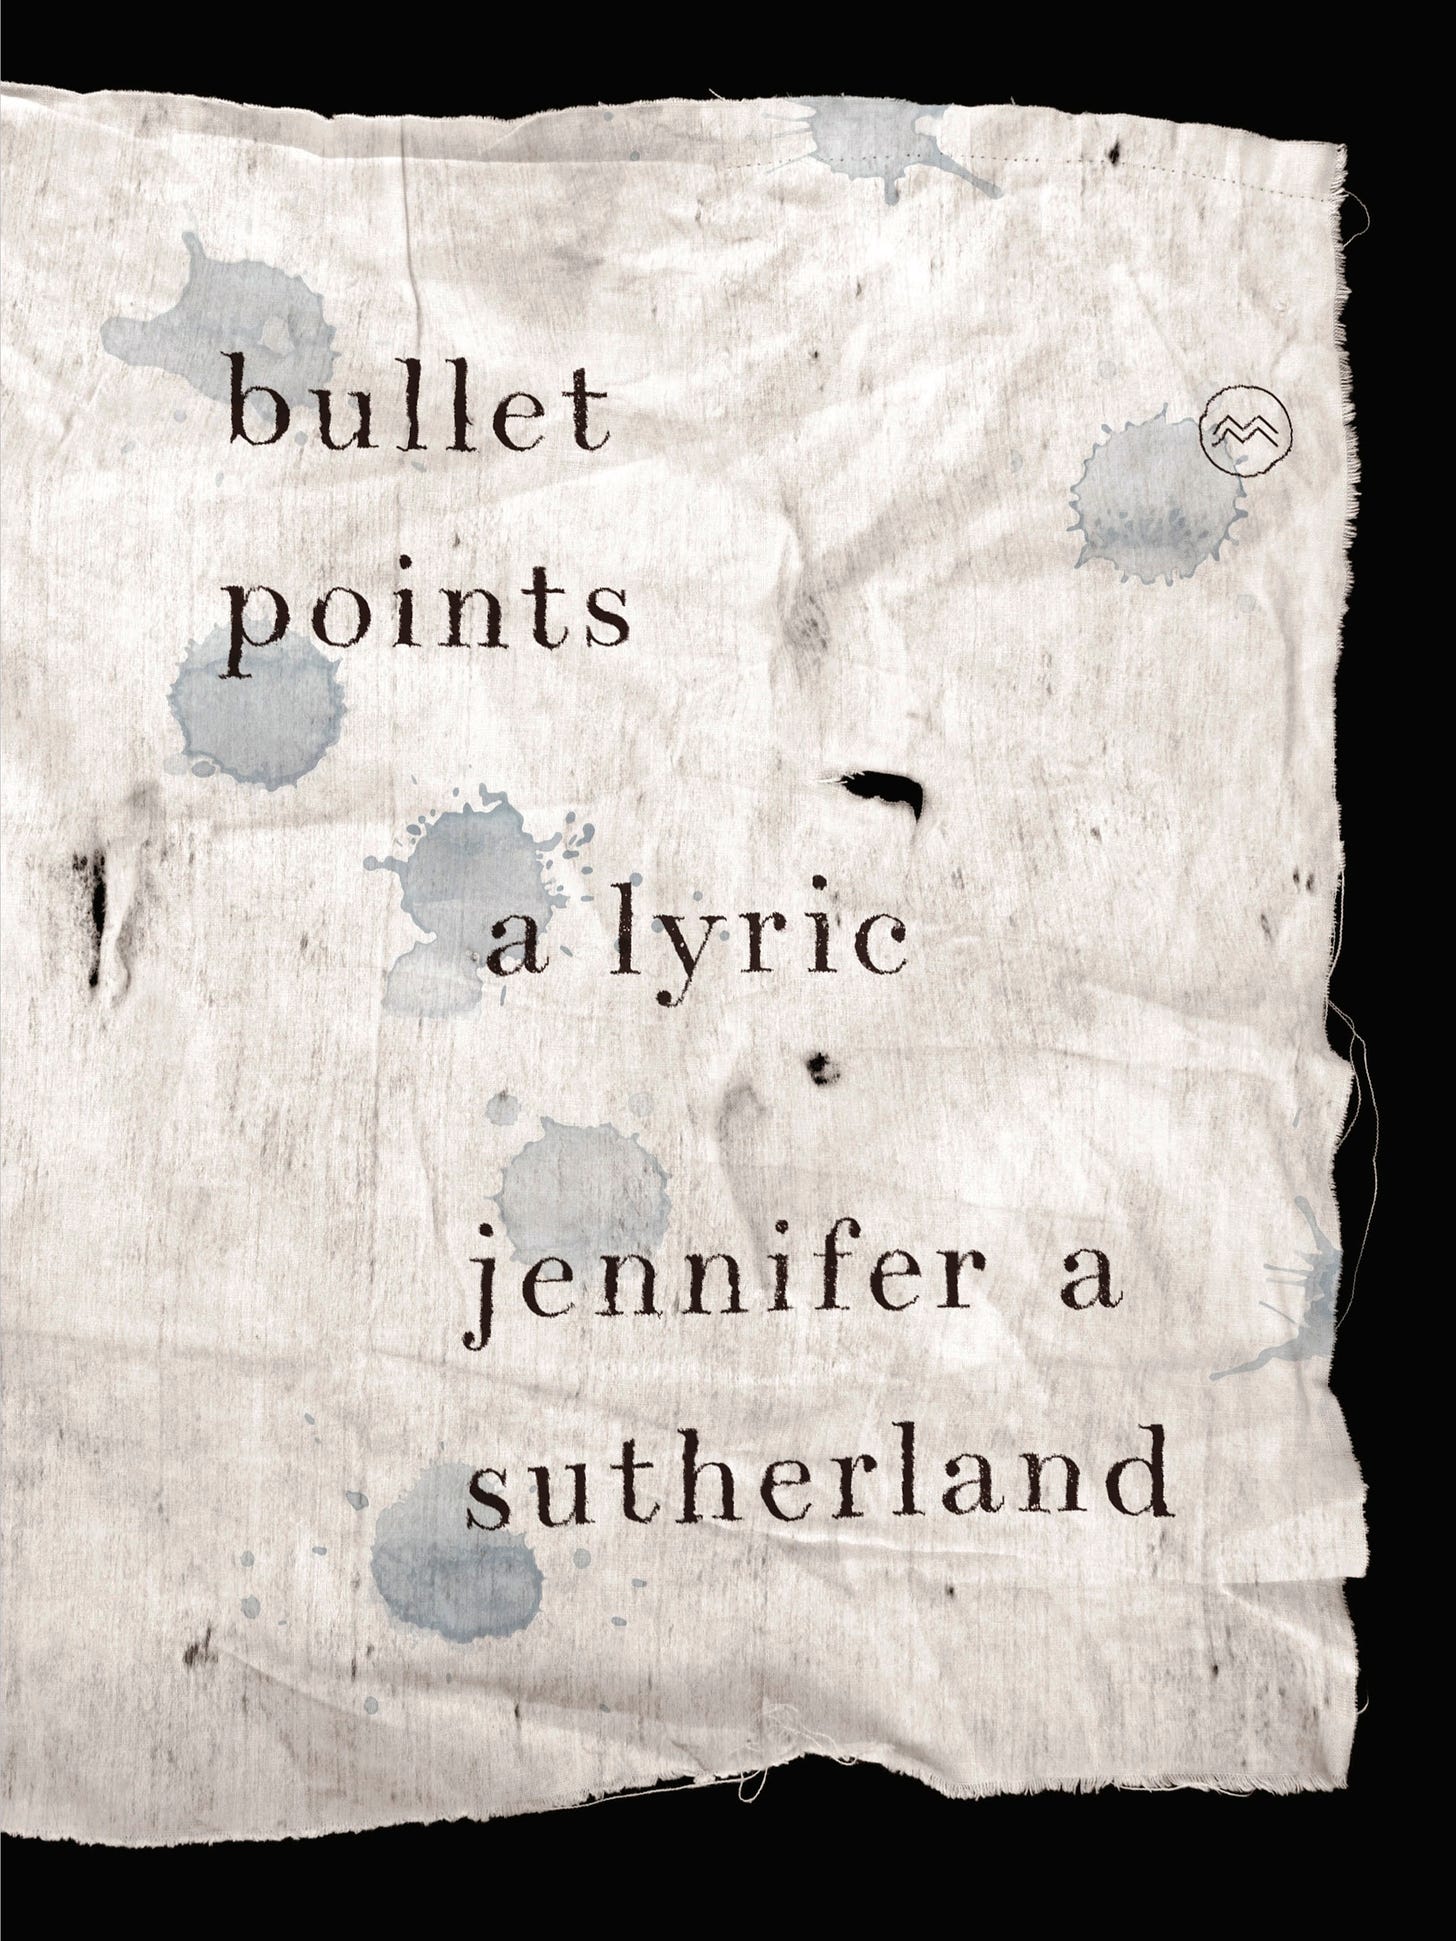 Cover of the poetry book Bullet Points: A Lyric by Jennifer A Sutherland